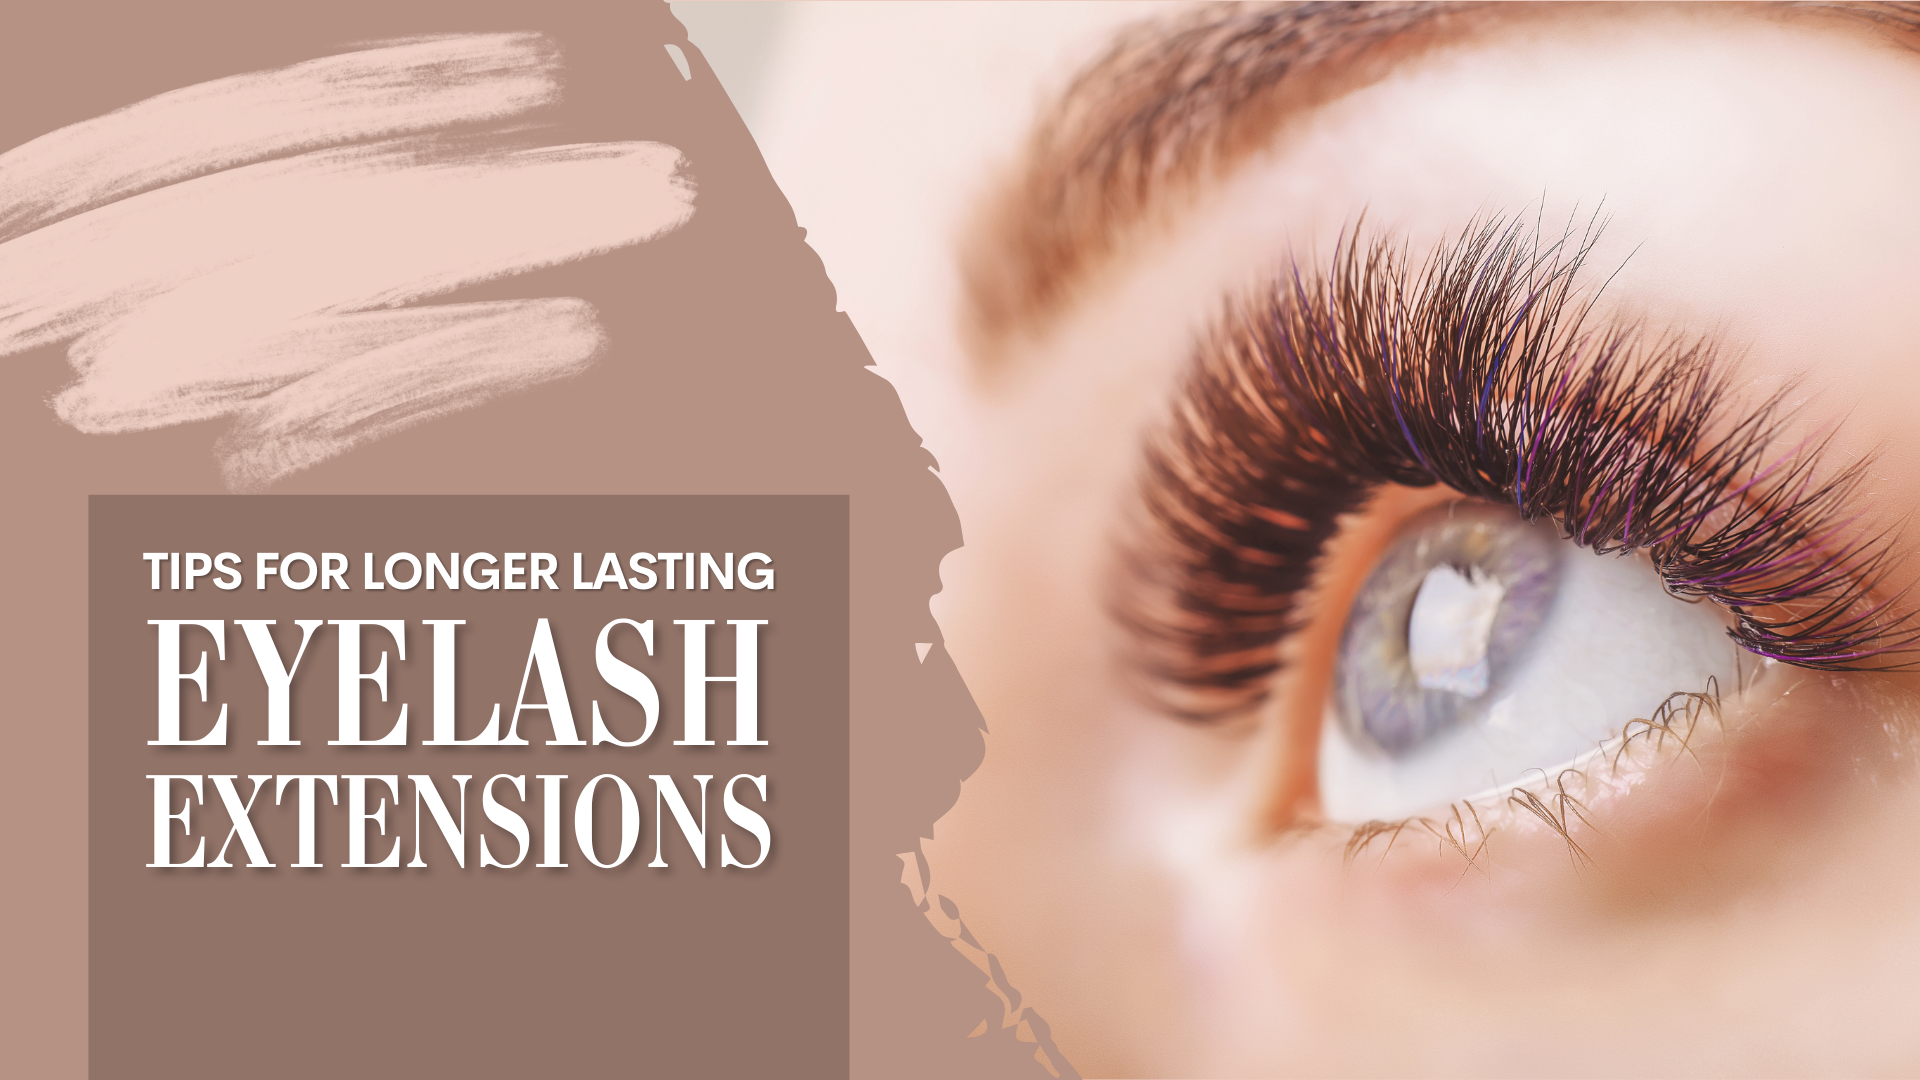 Expert Lash Artist and Esthetician Shares Aftercare Tips for Longer Lasting Eyelash Extensions